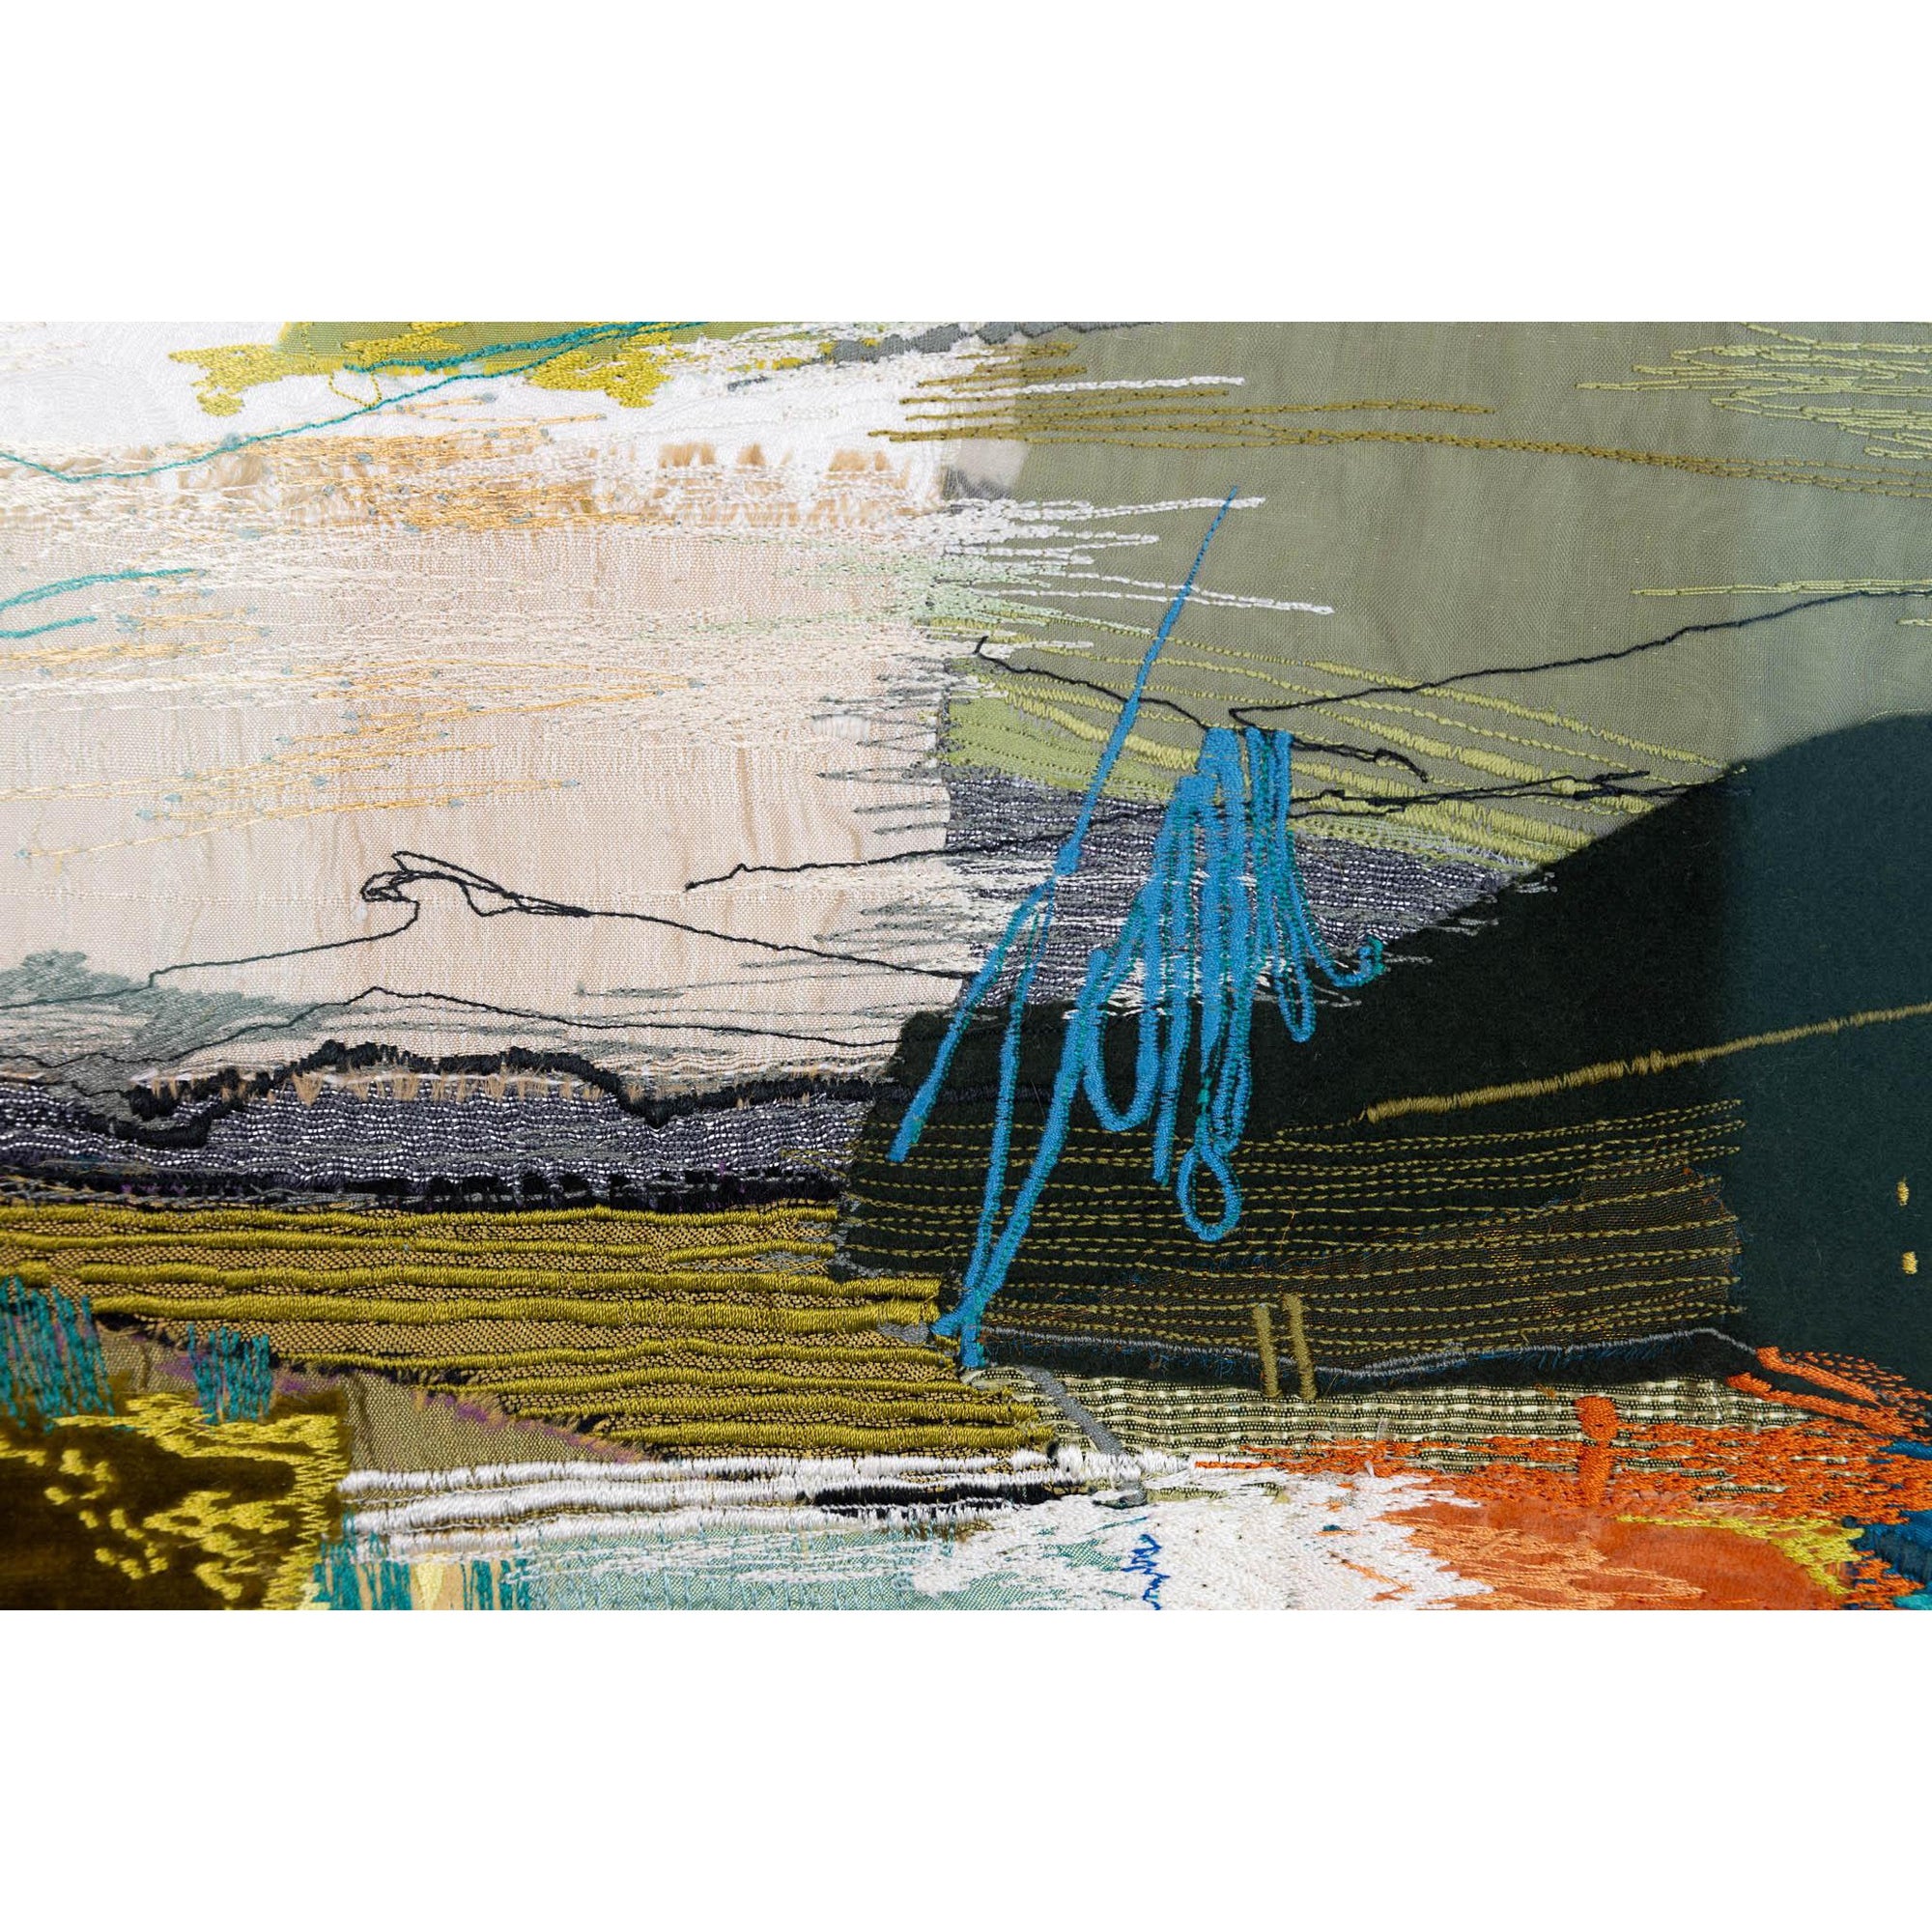 'St Ives to Carbis' dynamic stitched textiles by Sarah Pooley, available at Padstow Gallery, Cornwall